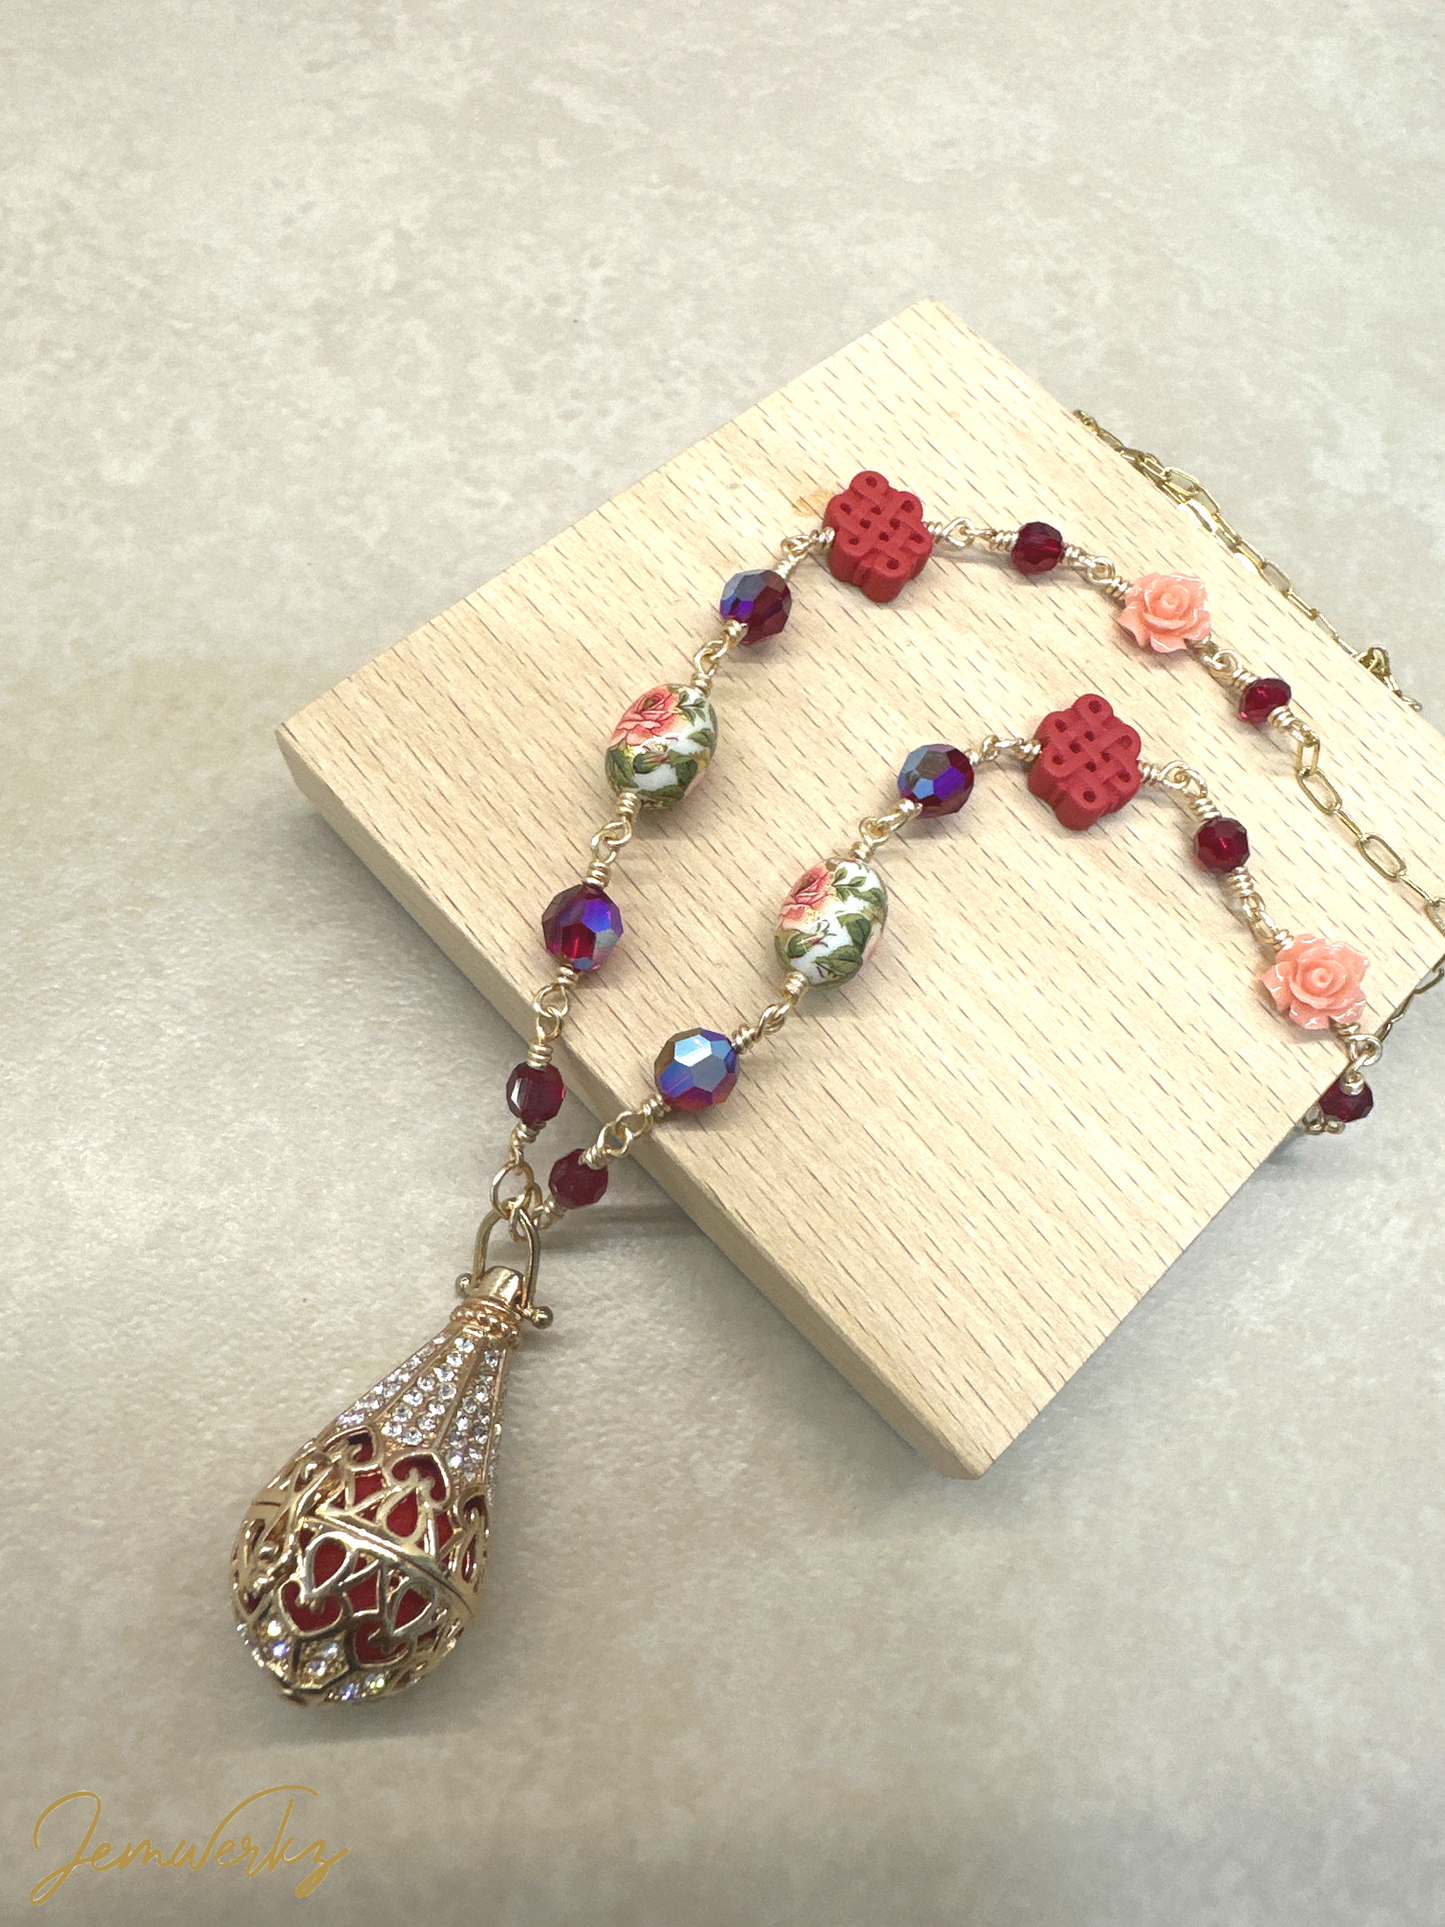 Load image into Gallery viewer, SAMIKO - Red Swarovski Crystal Necklace with Japan Floral Beads, Chinese Knot, Rose and Aroma Cage
